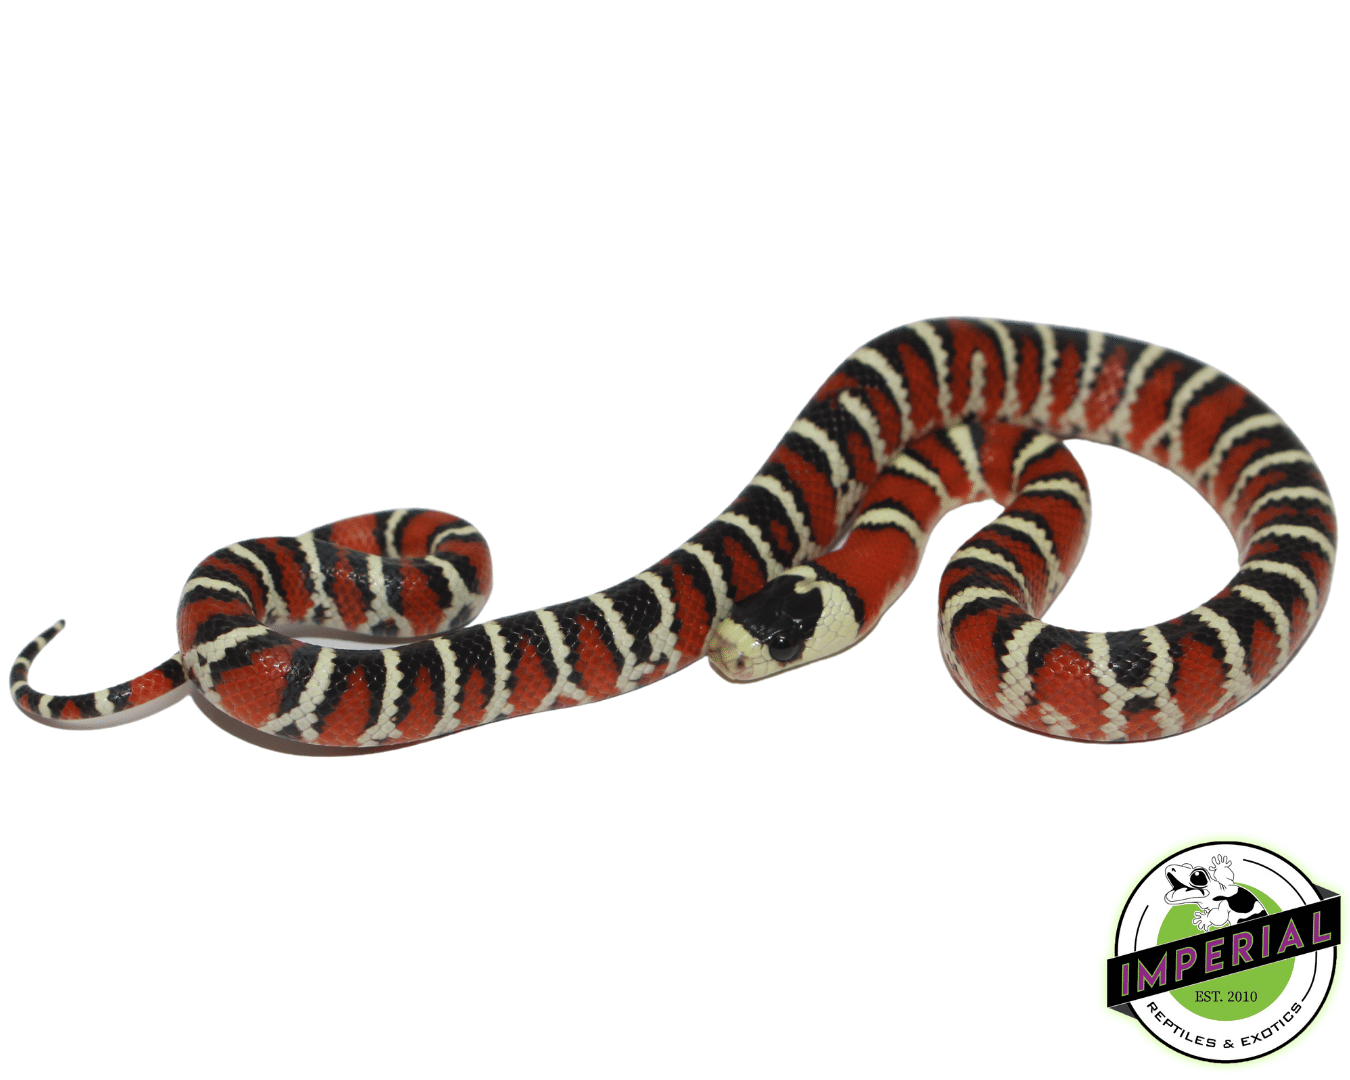 arizona mountain kingsnake for sale, buy reptiles online at cheap prices